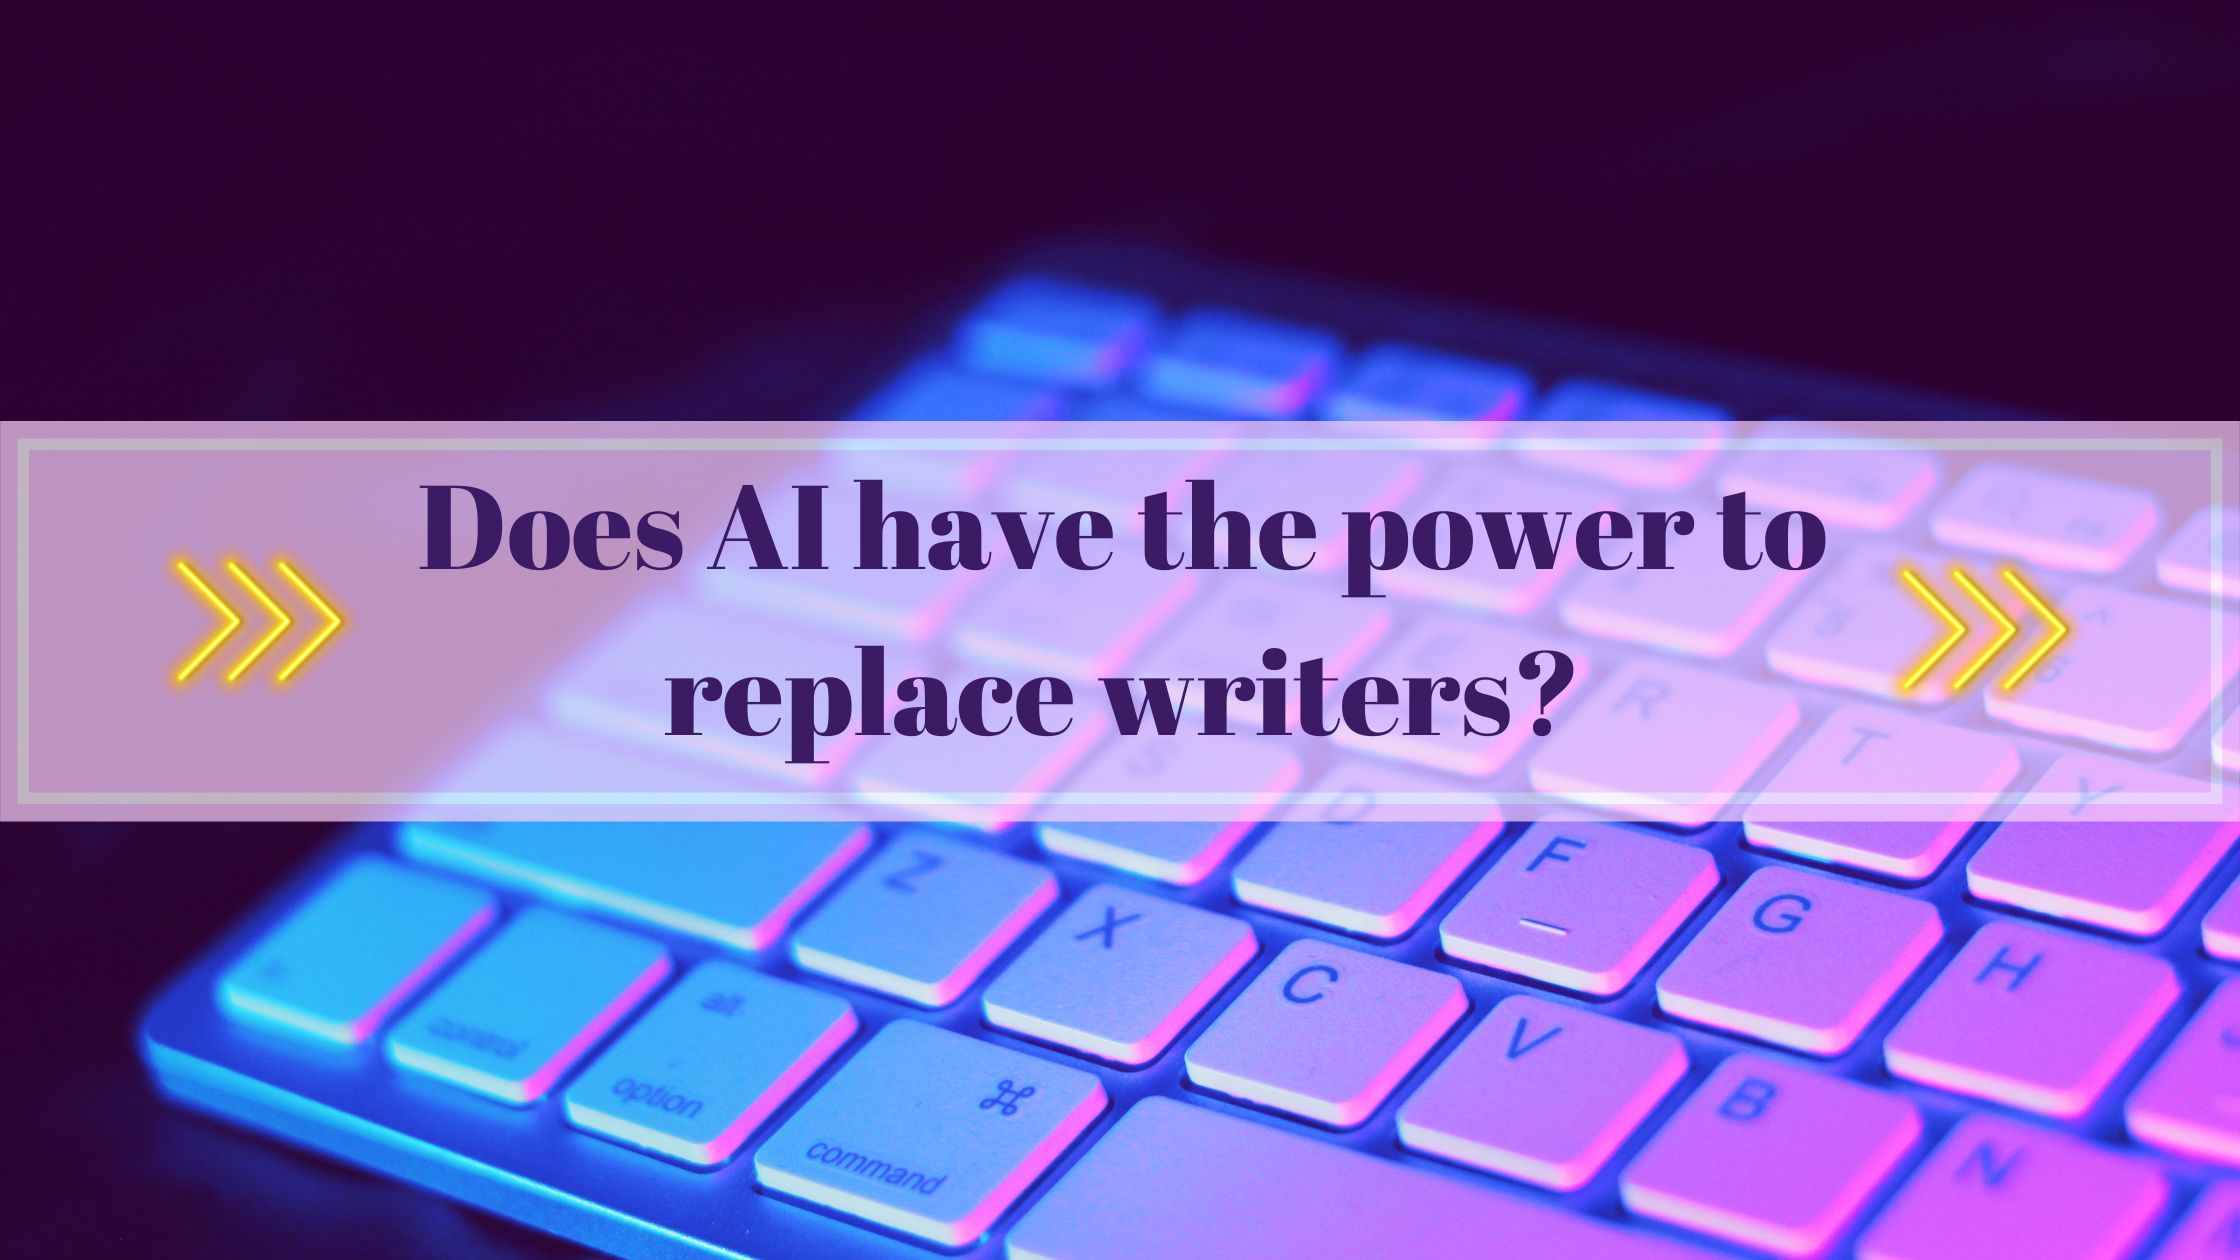 Does AI have the power to replace writers?